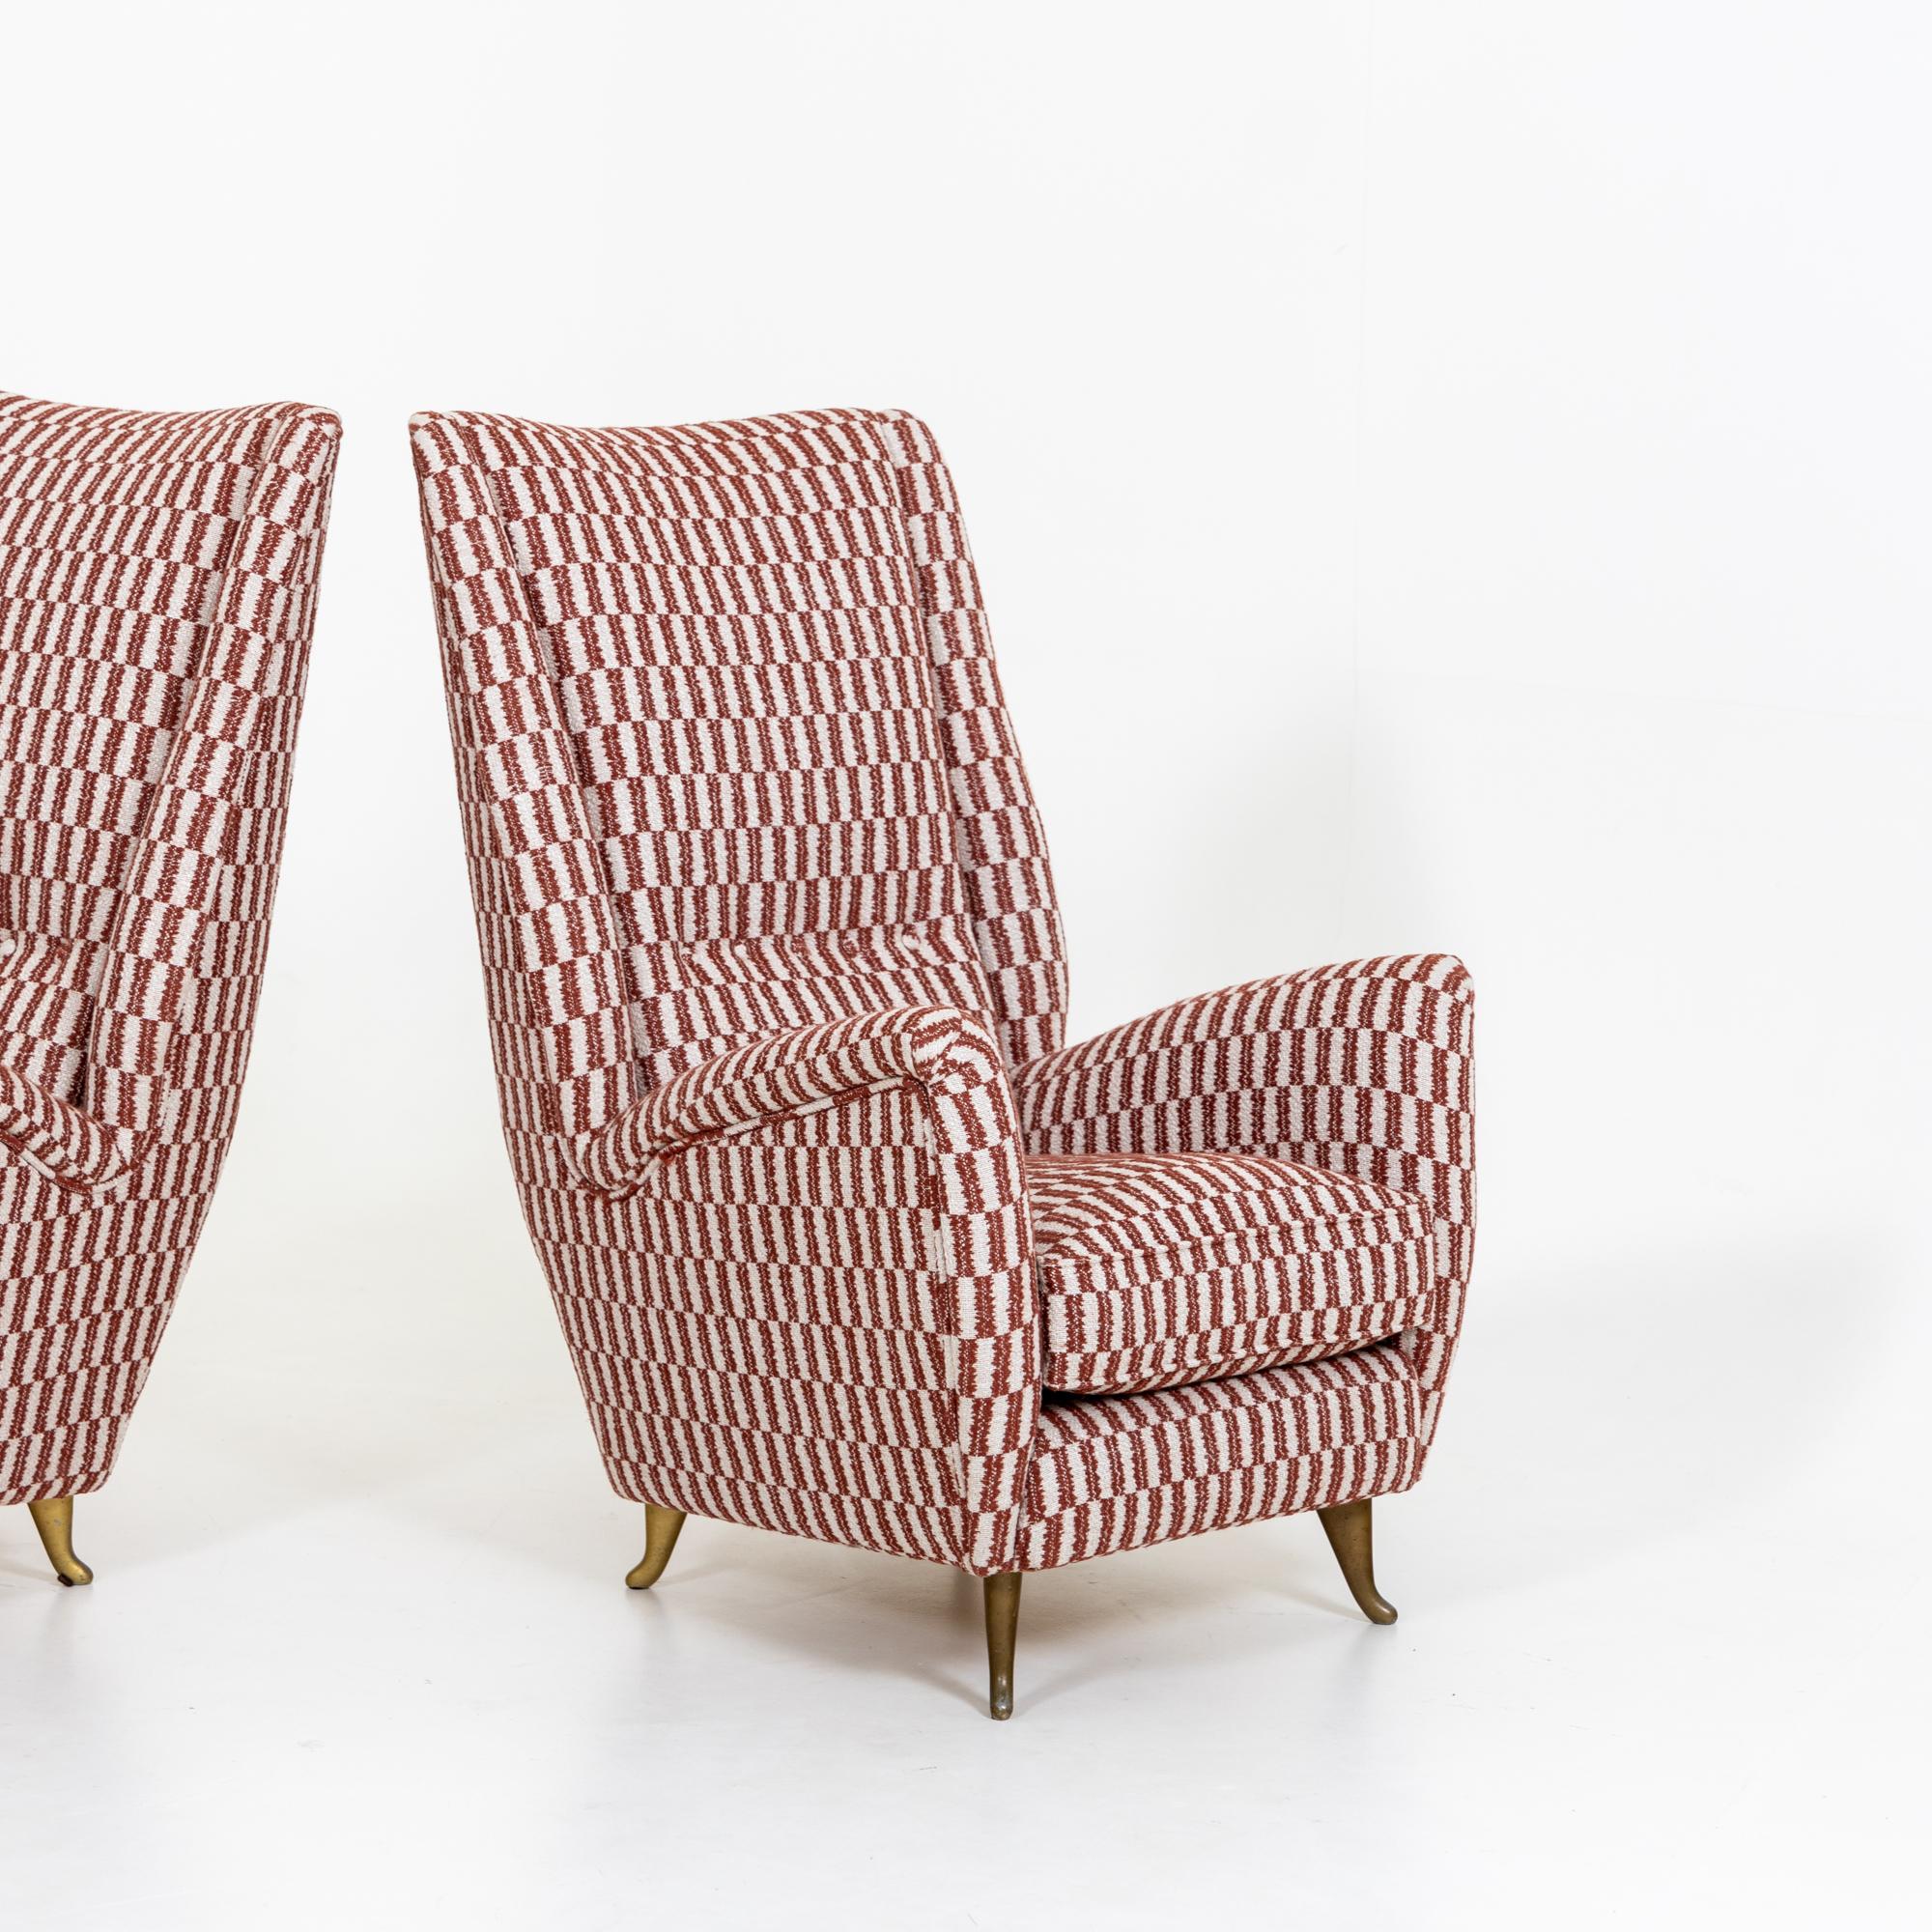 Pair of high back lounge chairs designed by Gio Ponti and produced by ISA Bergamo.
This pair of newly upholstered chairs are supported by four solid brass metal curved feet.


